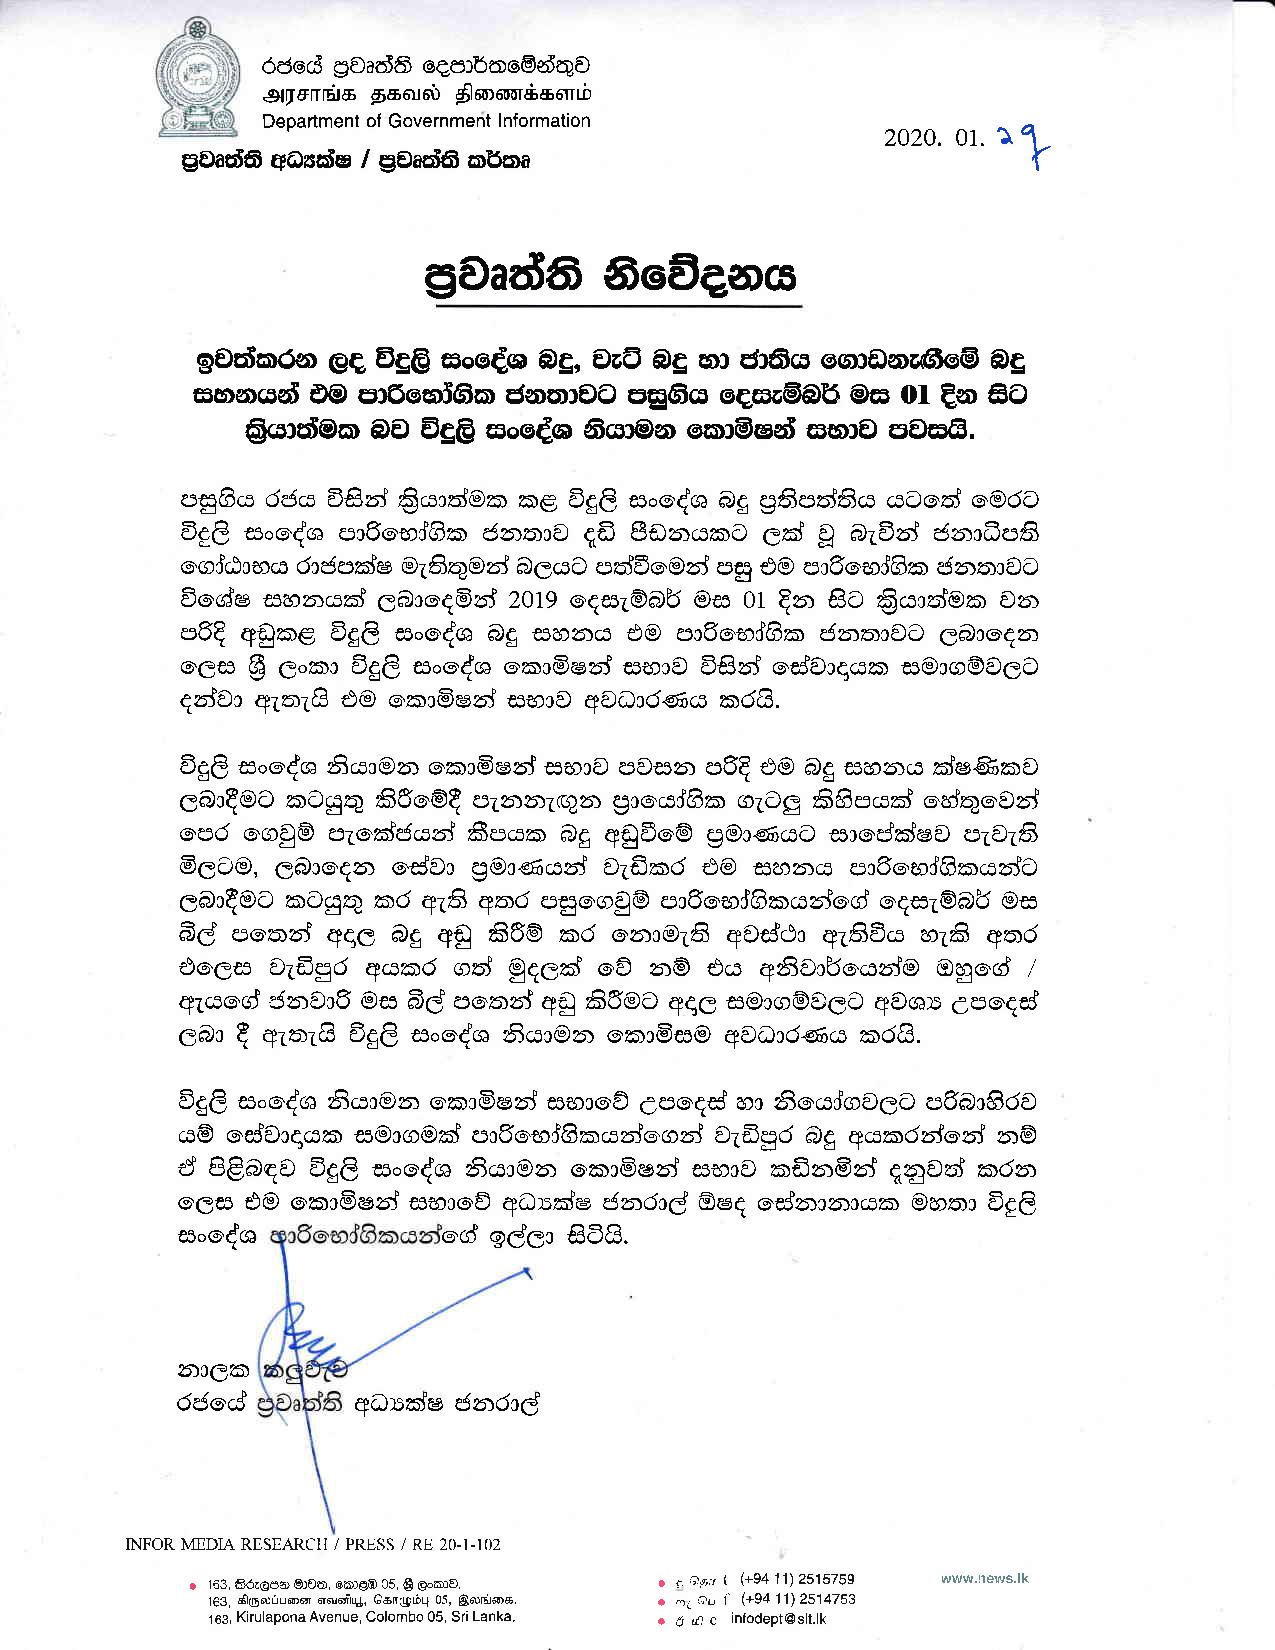 Media Release on 29.01.2020 page 001